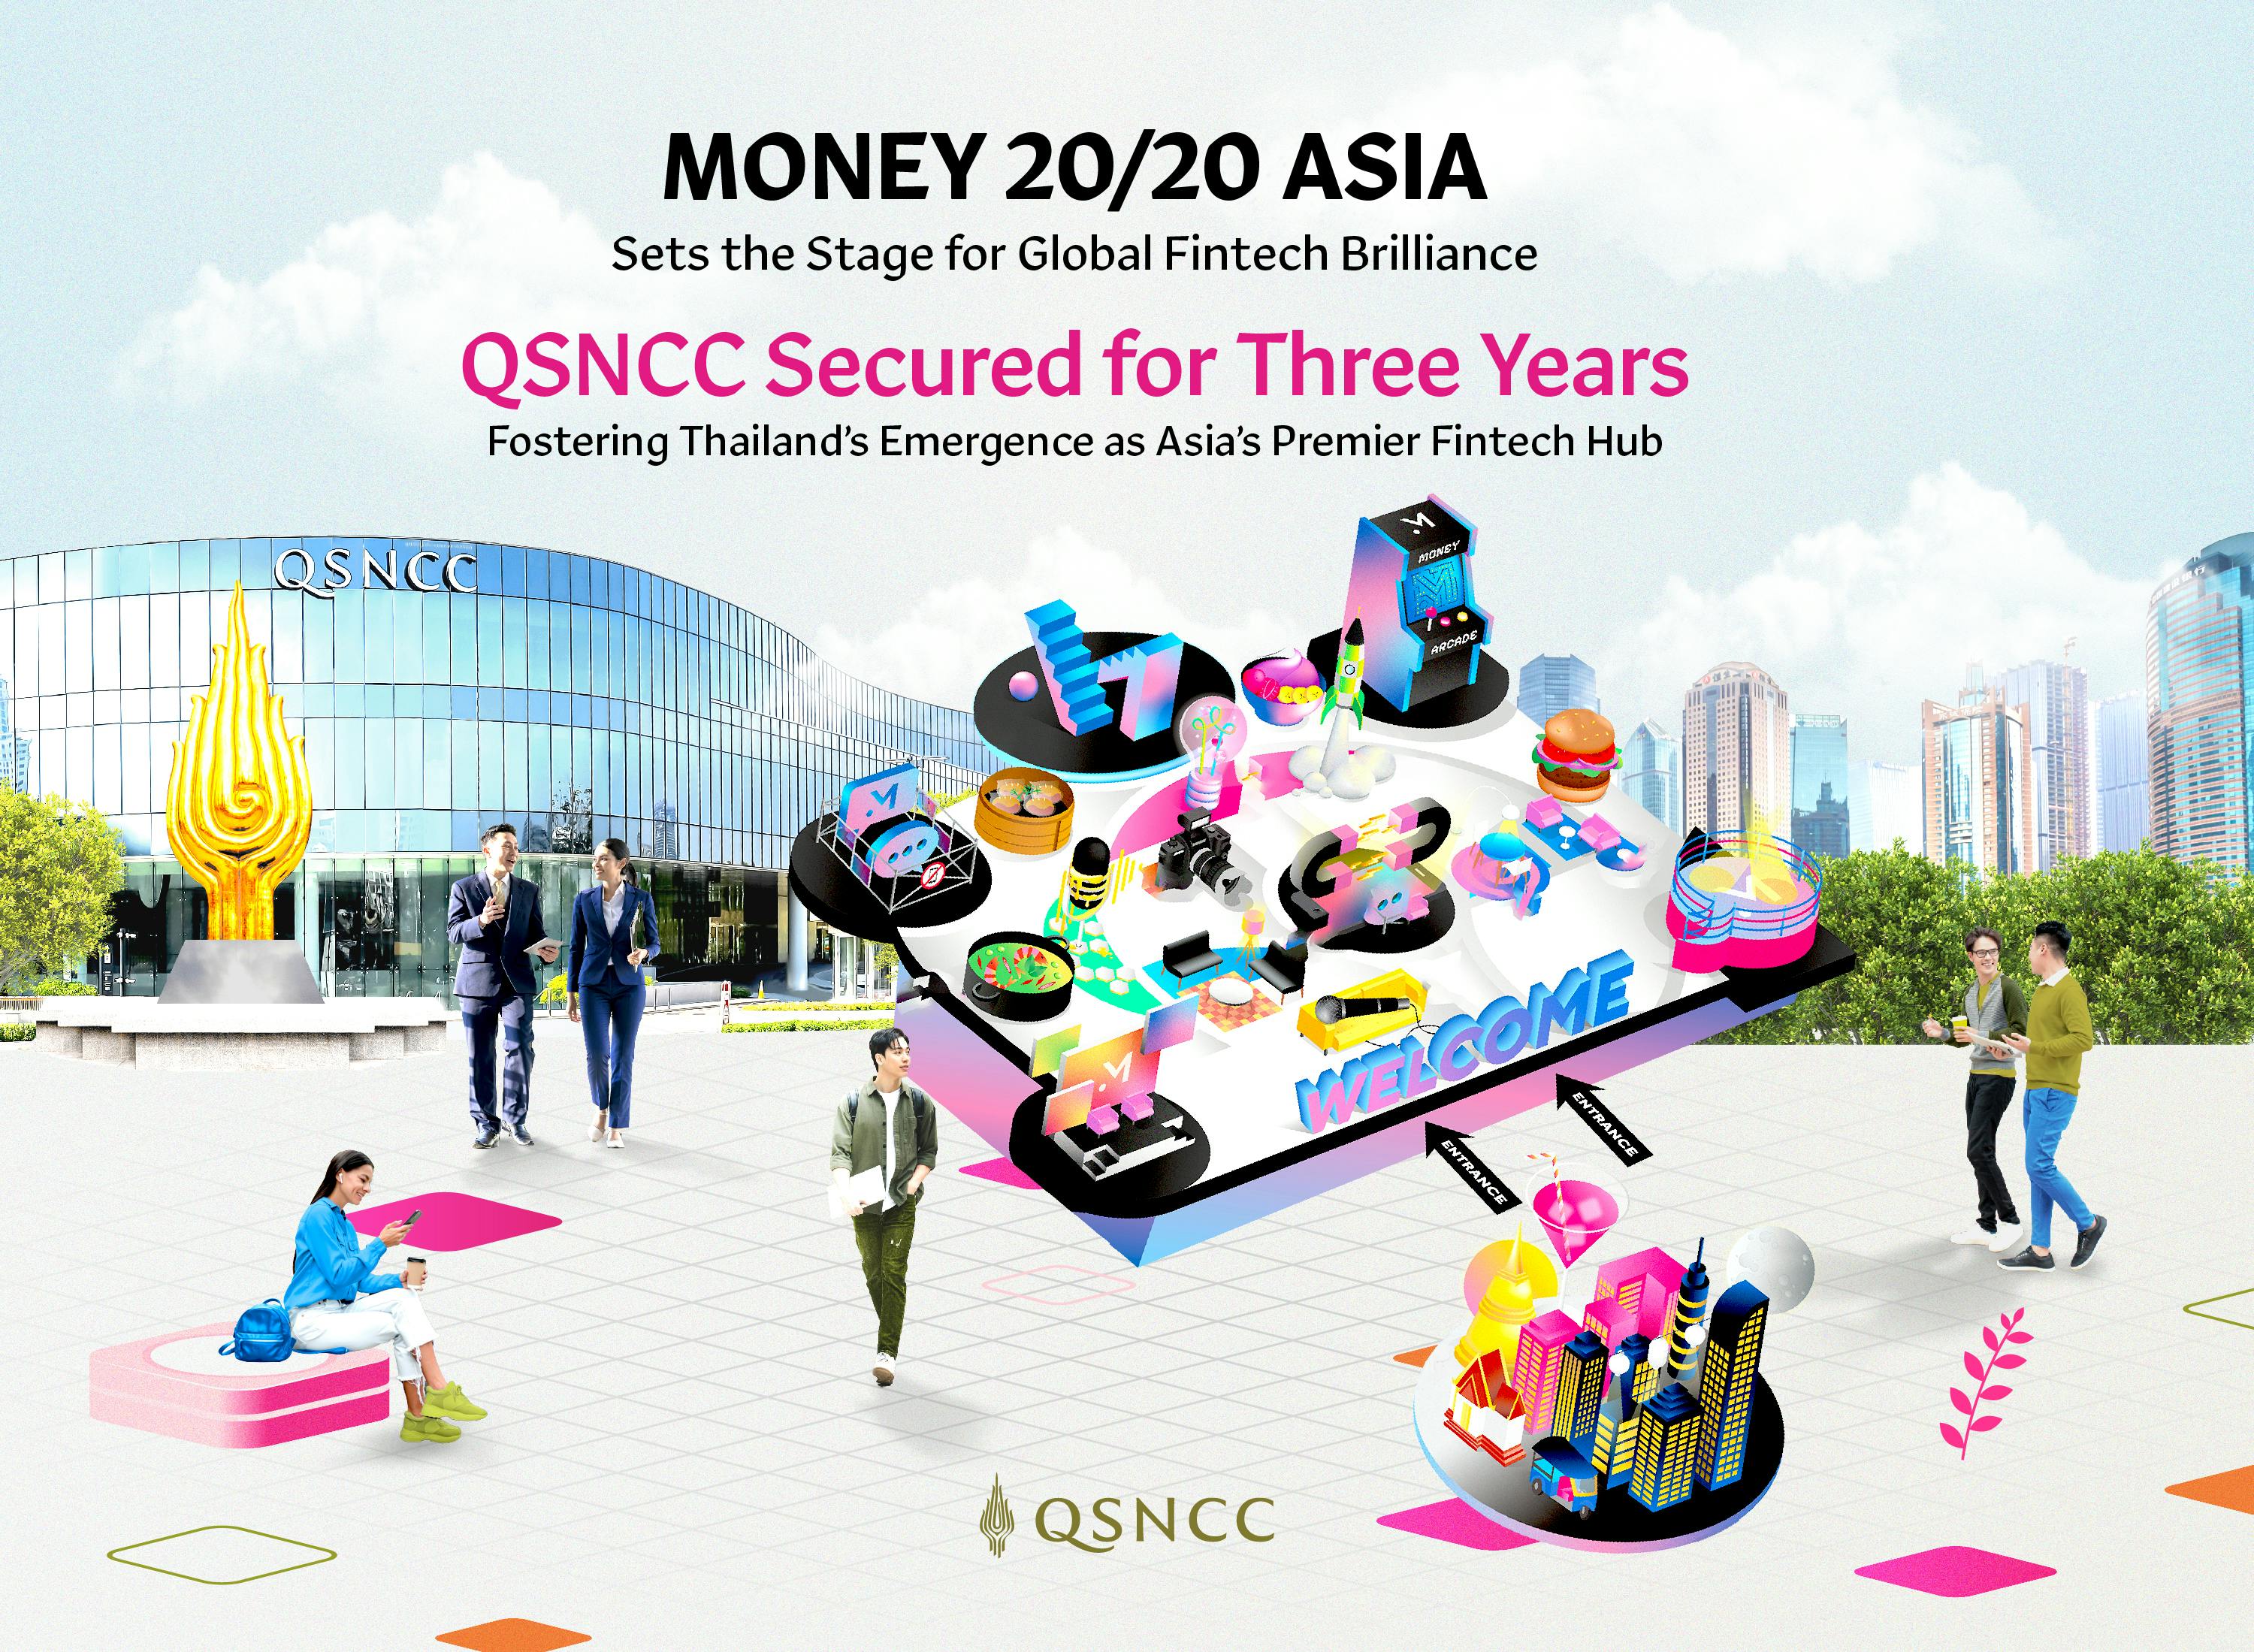 Money20/20 Asia Sets the Stage for Global Fintech Brilliance QSNCC Secured for Three Years  Fostering Thailand’s Emergence as Asia’s Premier Fintech Hub